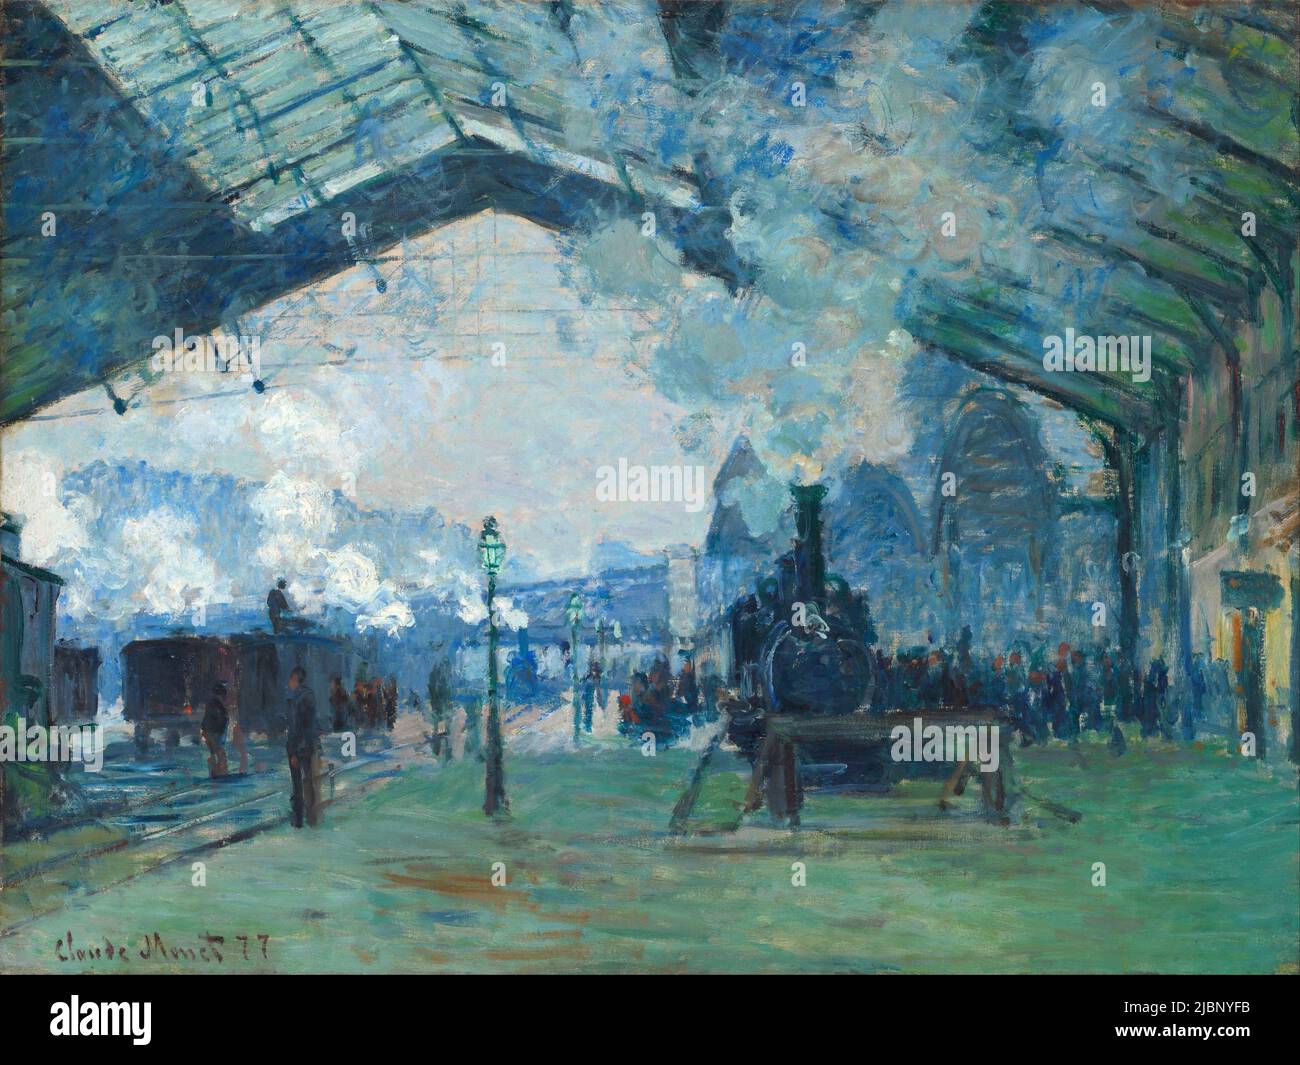 Arrival of the Normandy Train, Gare Saint-Lazare, 1877, part of Monet's Gare Saint-Lazare series. Painting by Claude Monet Stock Photo